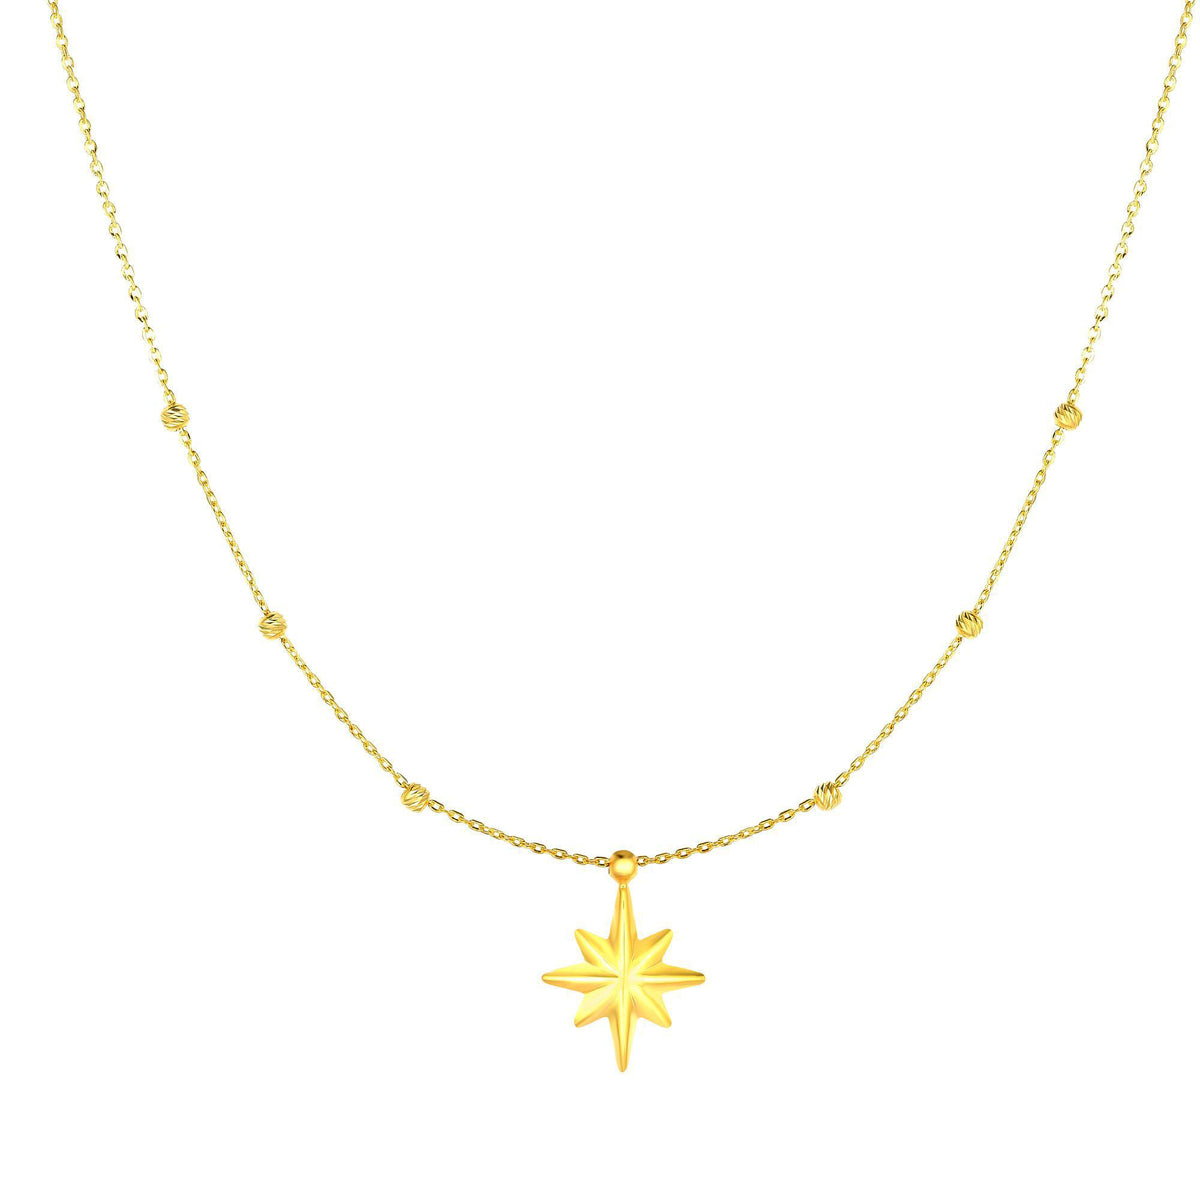 14k Yellow Gold Dangle North Star Charm Necklace, 18" fine designer jewelry for men and women